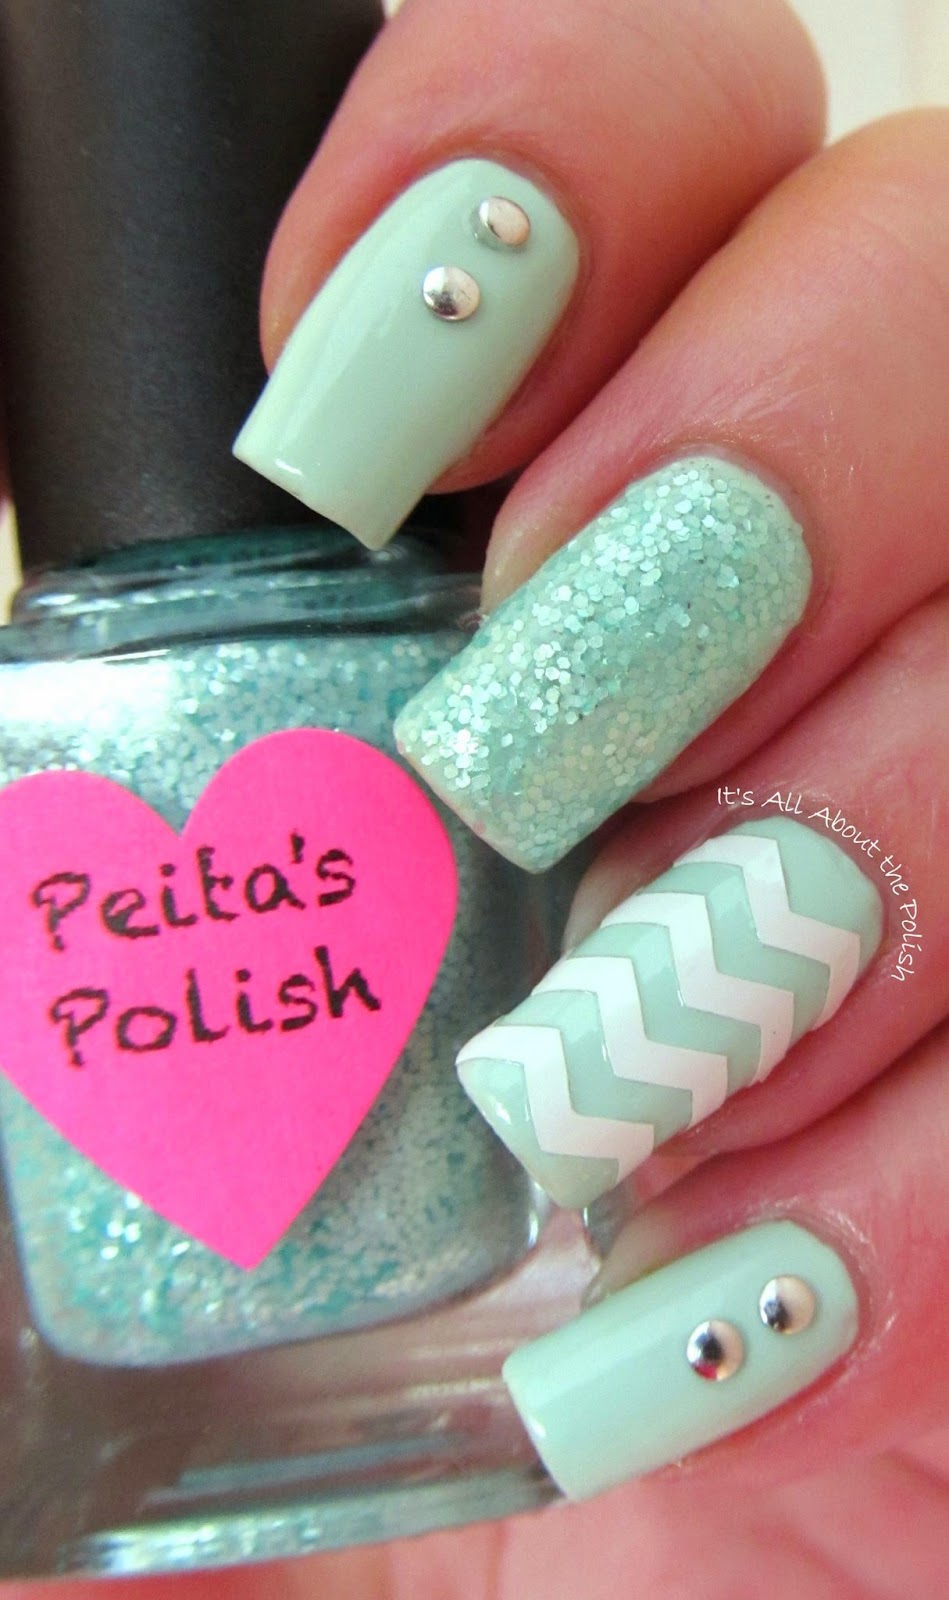 It's all about the polish: Mint Green Chevron